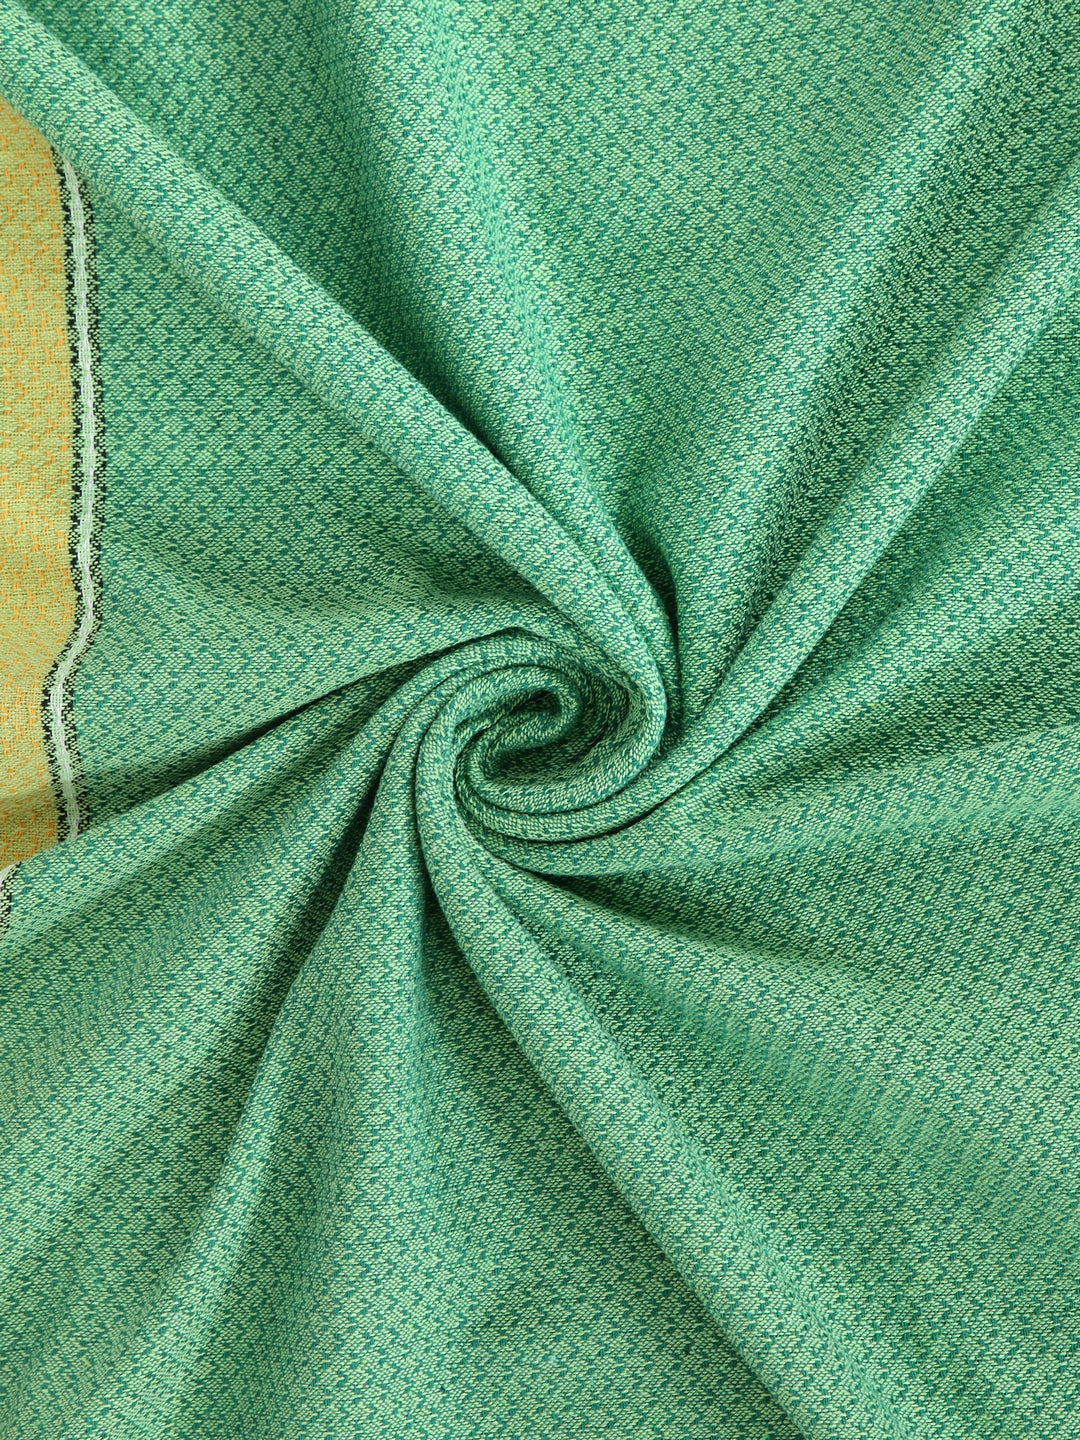 KLOTTHE Green Cotton Solid Rectangle Table Cover (72X52 Inch)